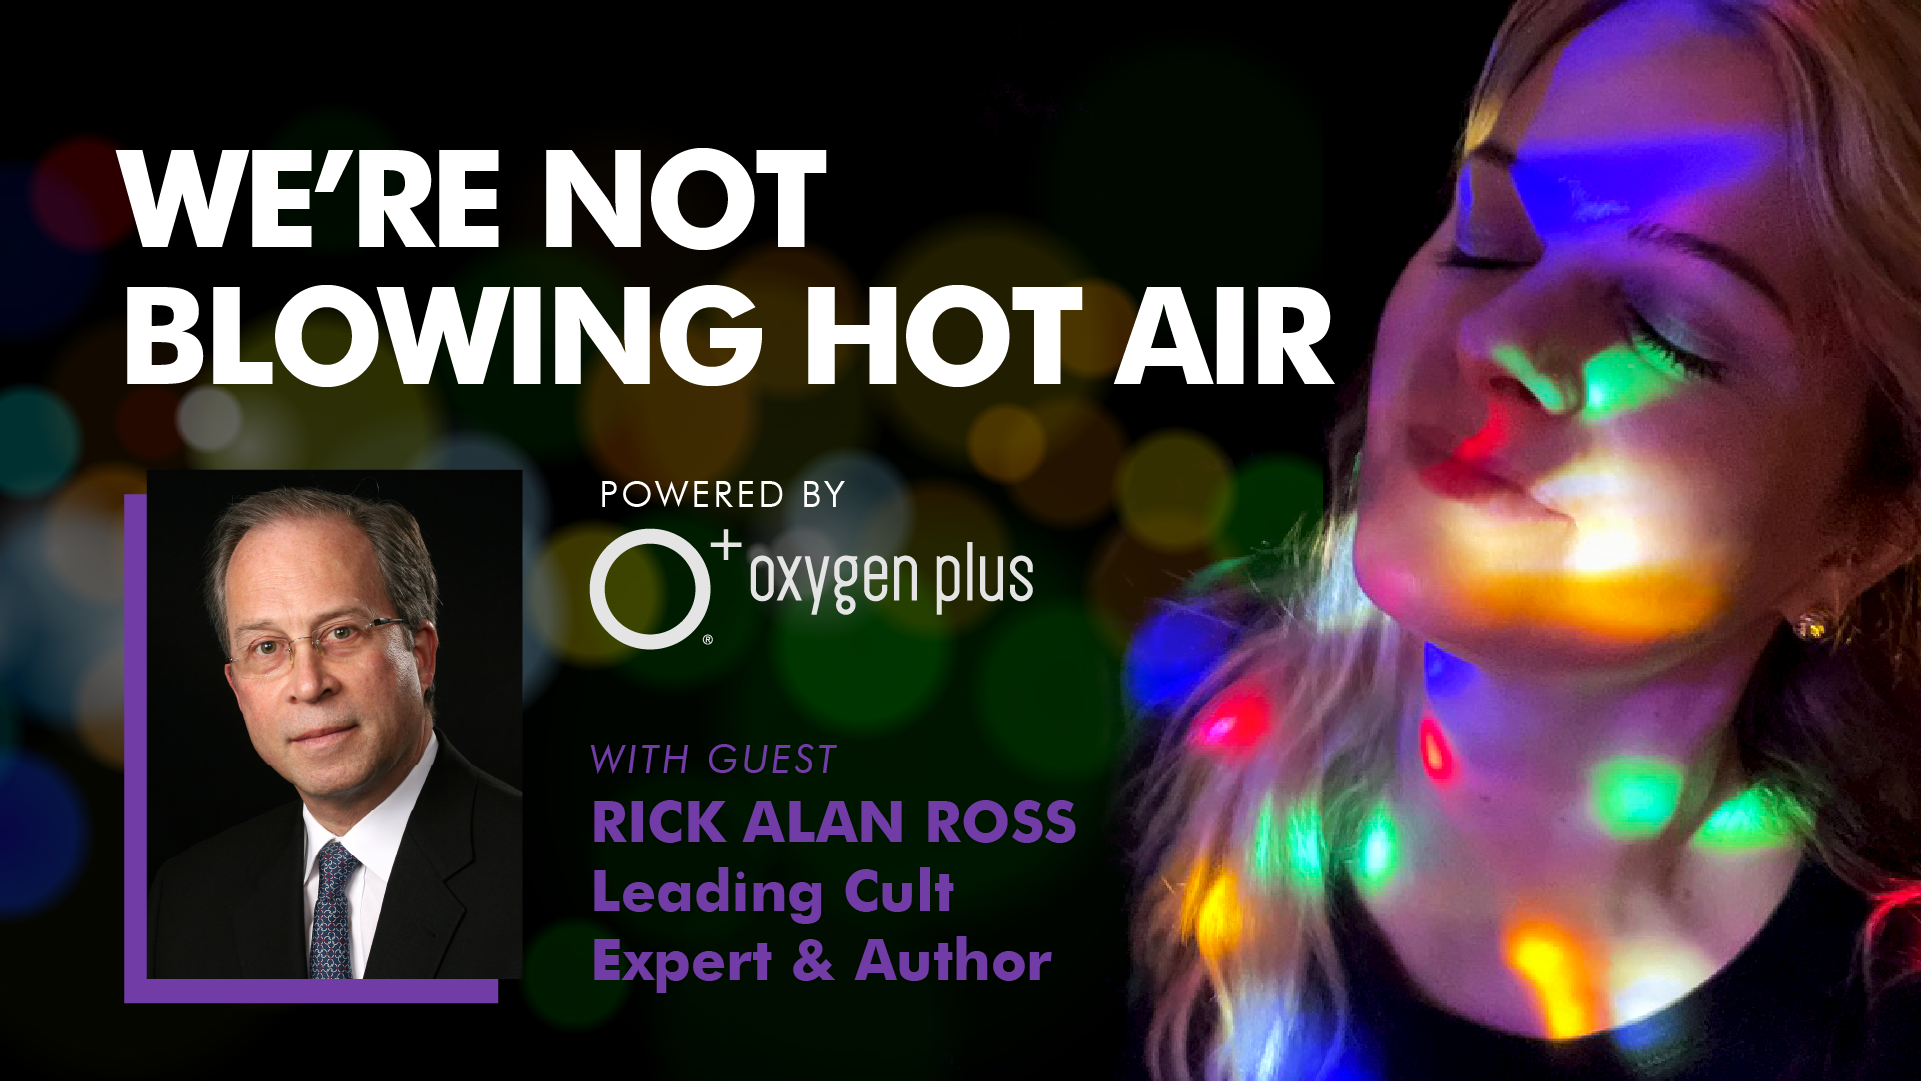 S4E02 - "What’s the Meaning of Life?" with Rick Alan Ross, leading cult expert, author and consultant